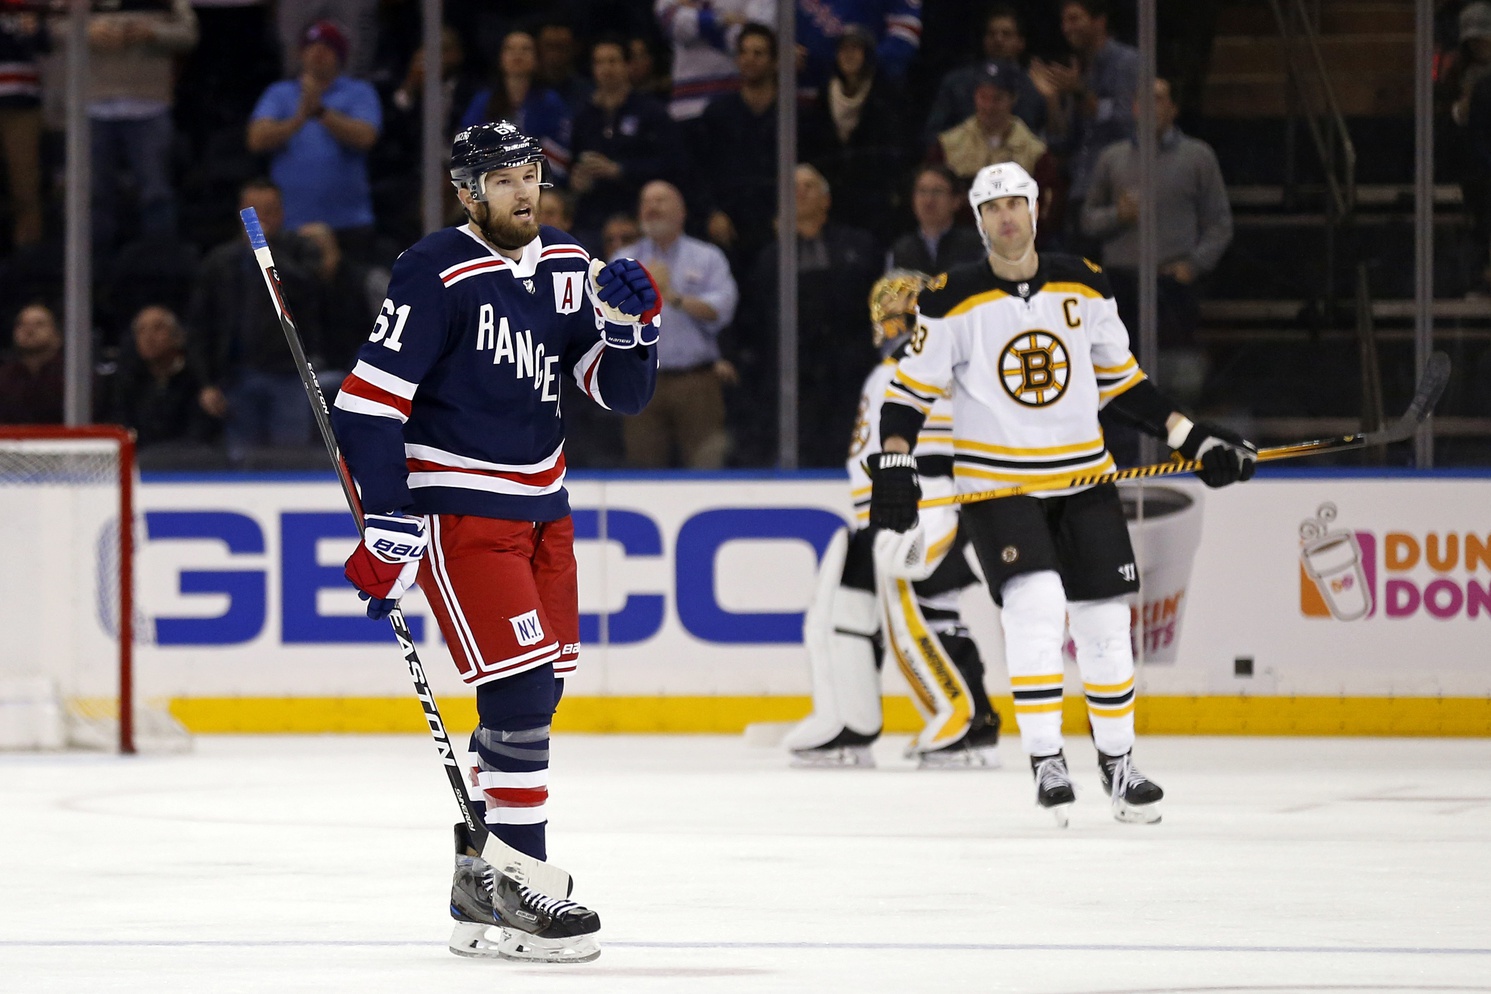 Remembering 'The Goal' scored by Rick Nash in Blue Jackets thriller